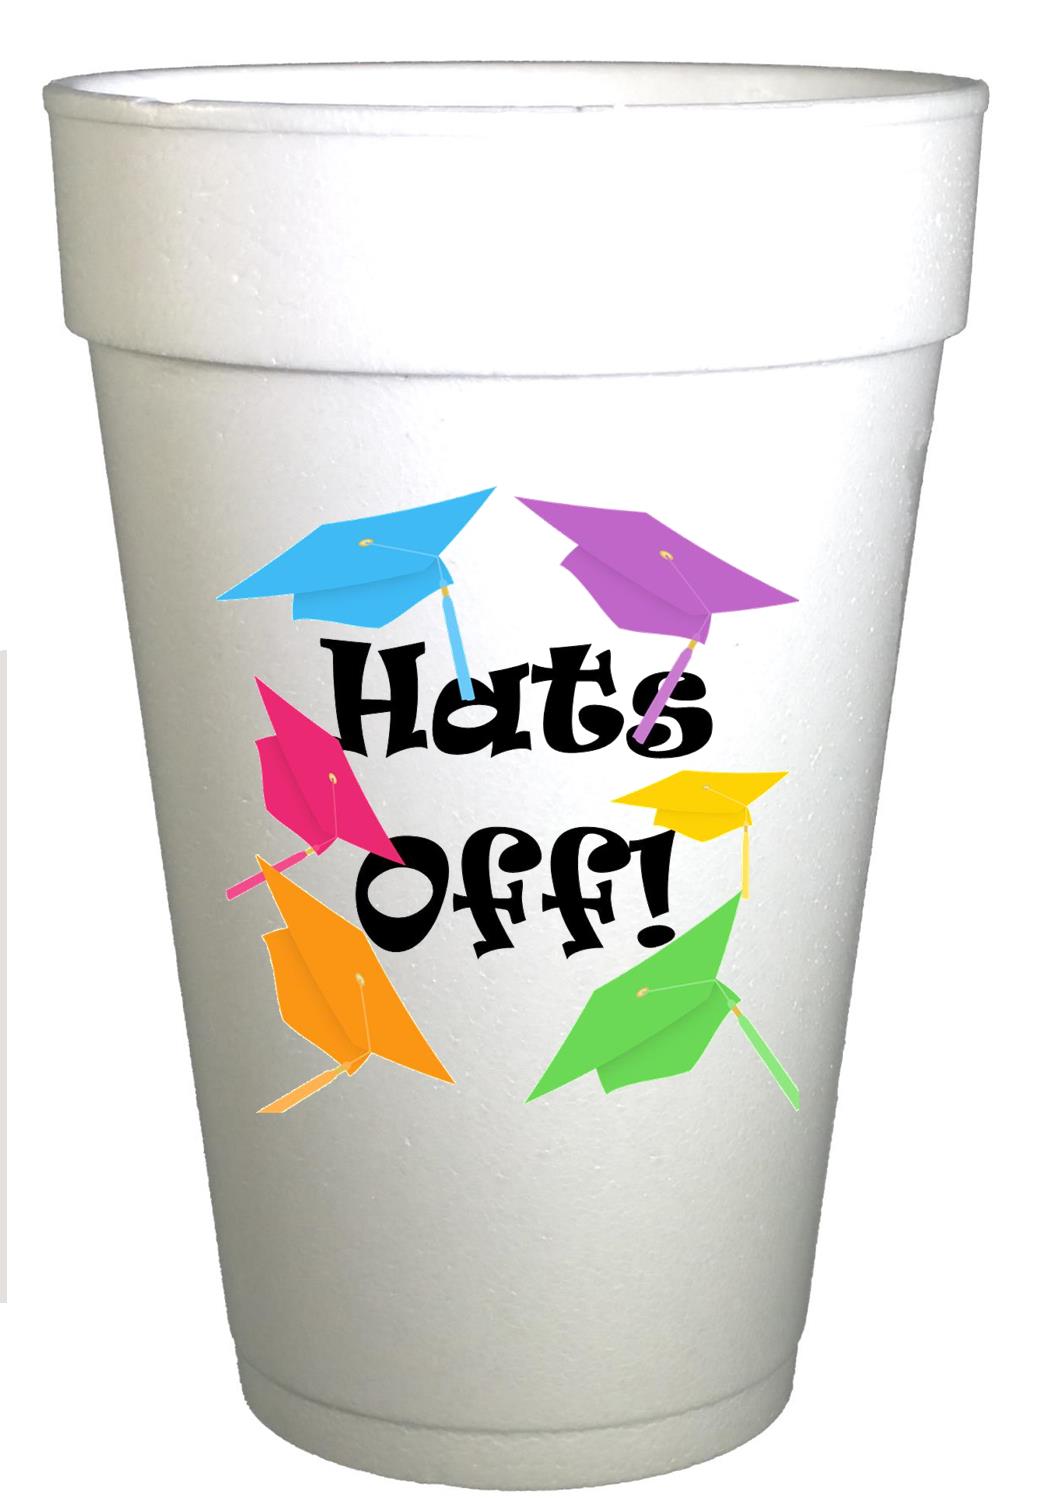 Styrofoam cup with bright colored graduation caps with text Hats Off!